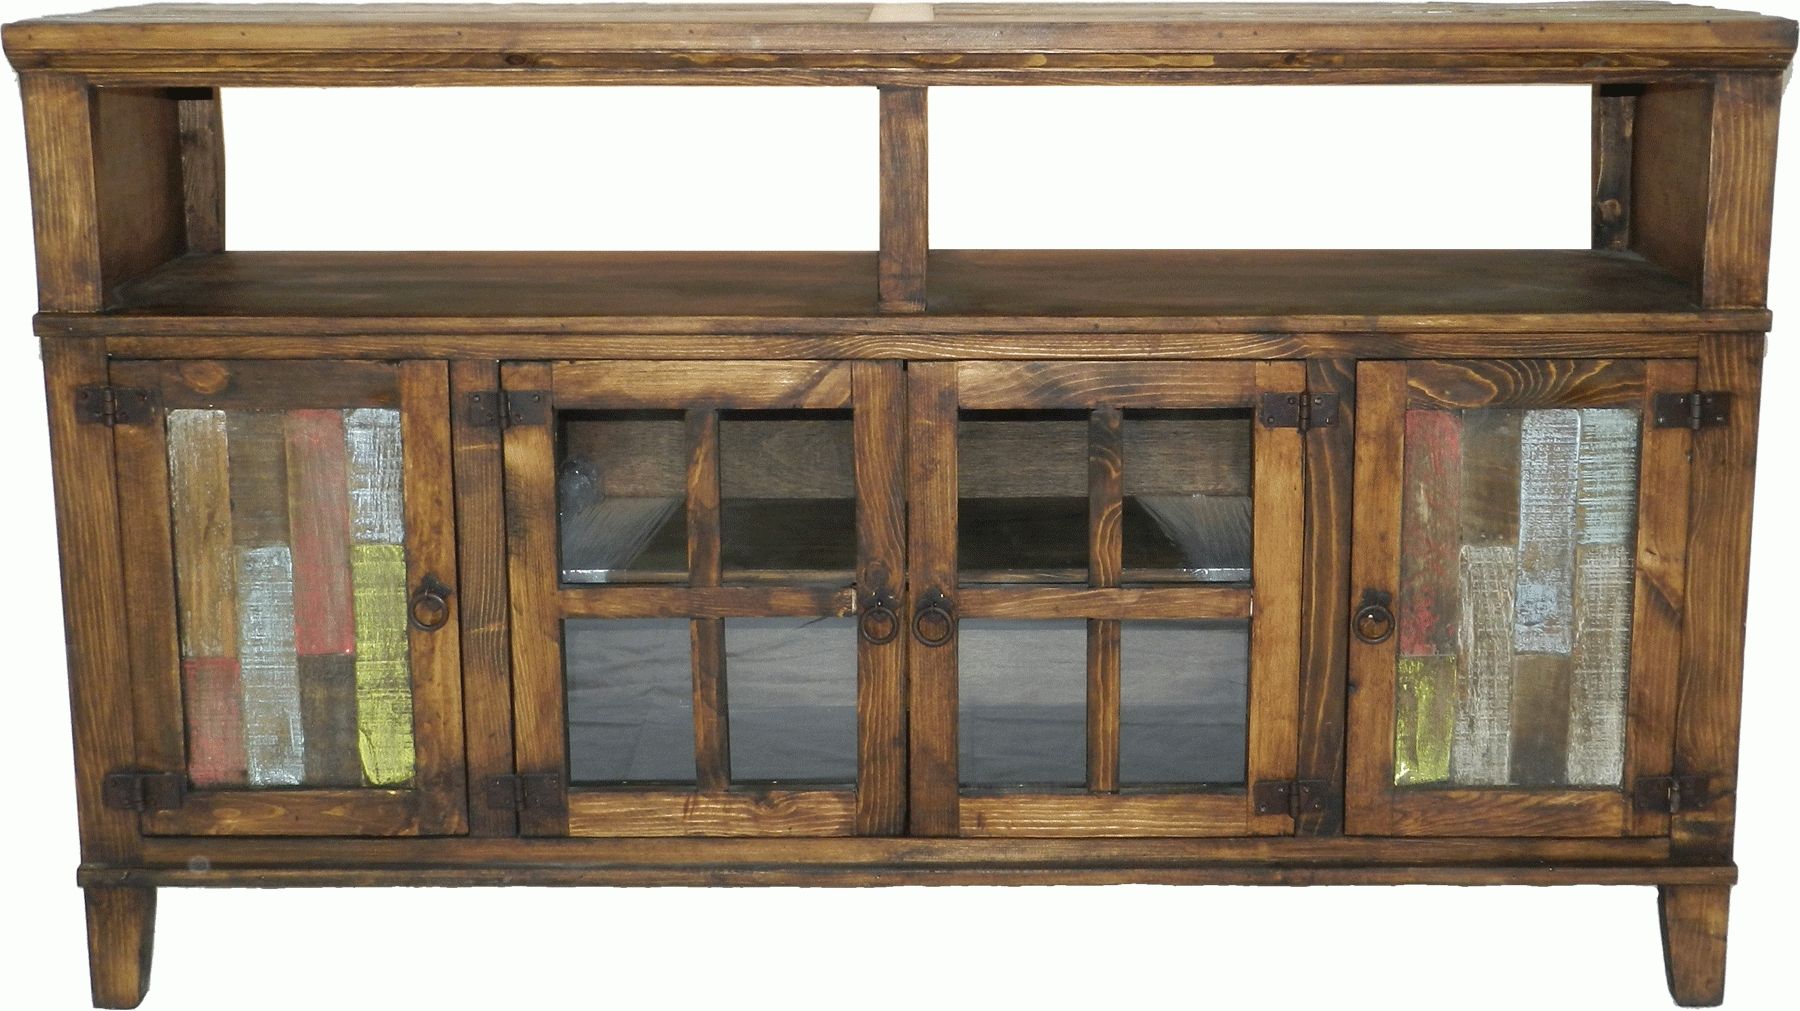 Tv Stands Archives | Home Furniture Intended For Rustic Pine Tv Cabinets (View 10 of 15)